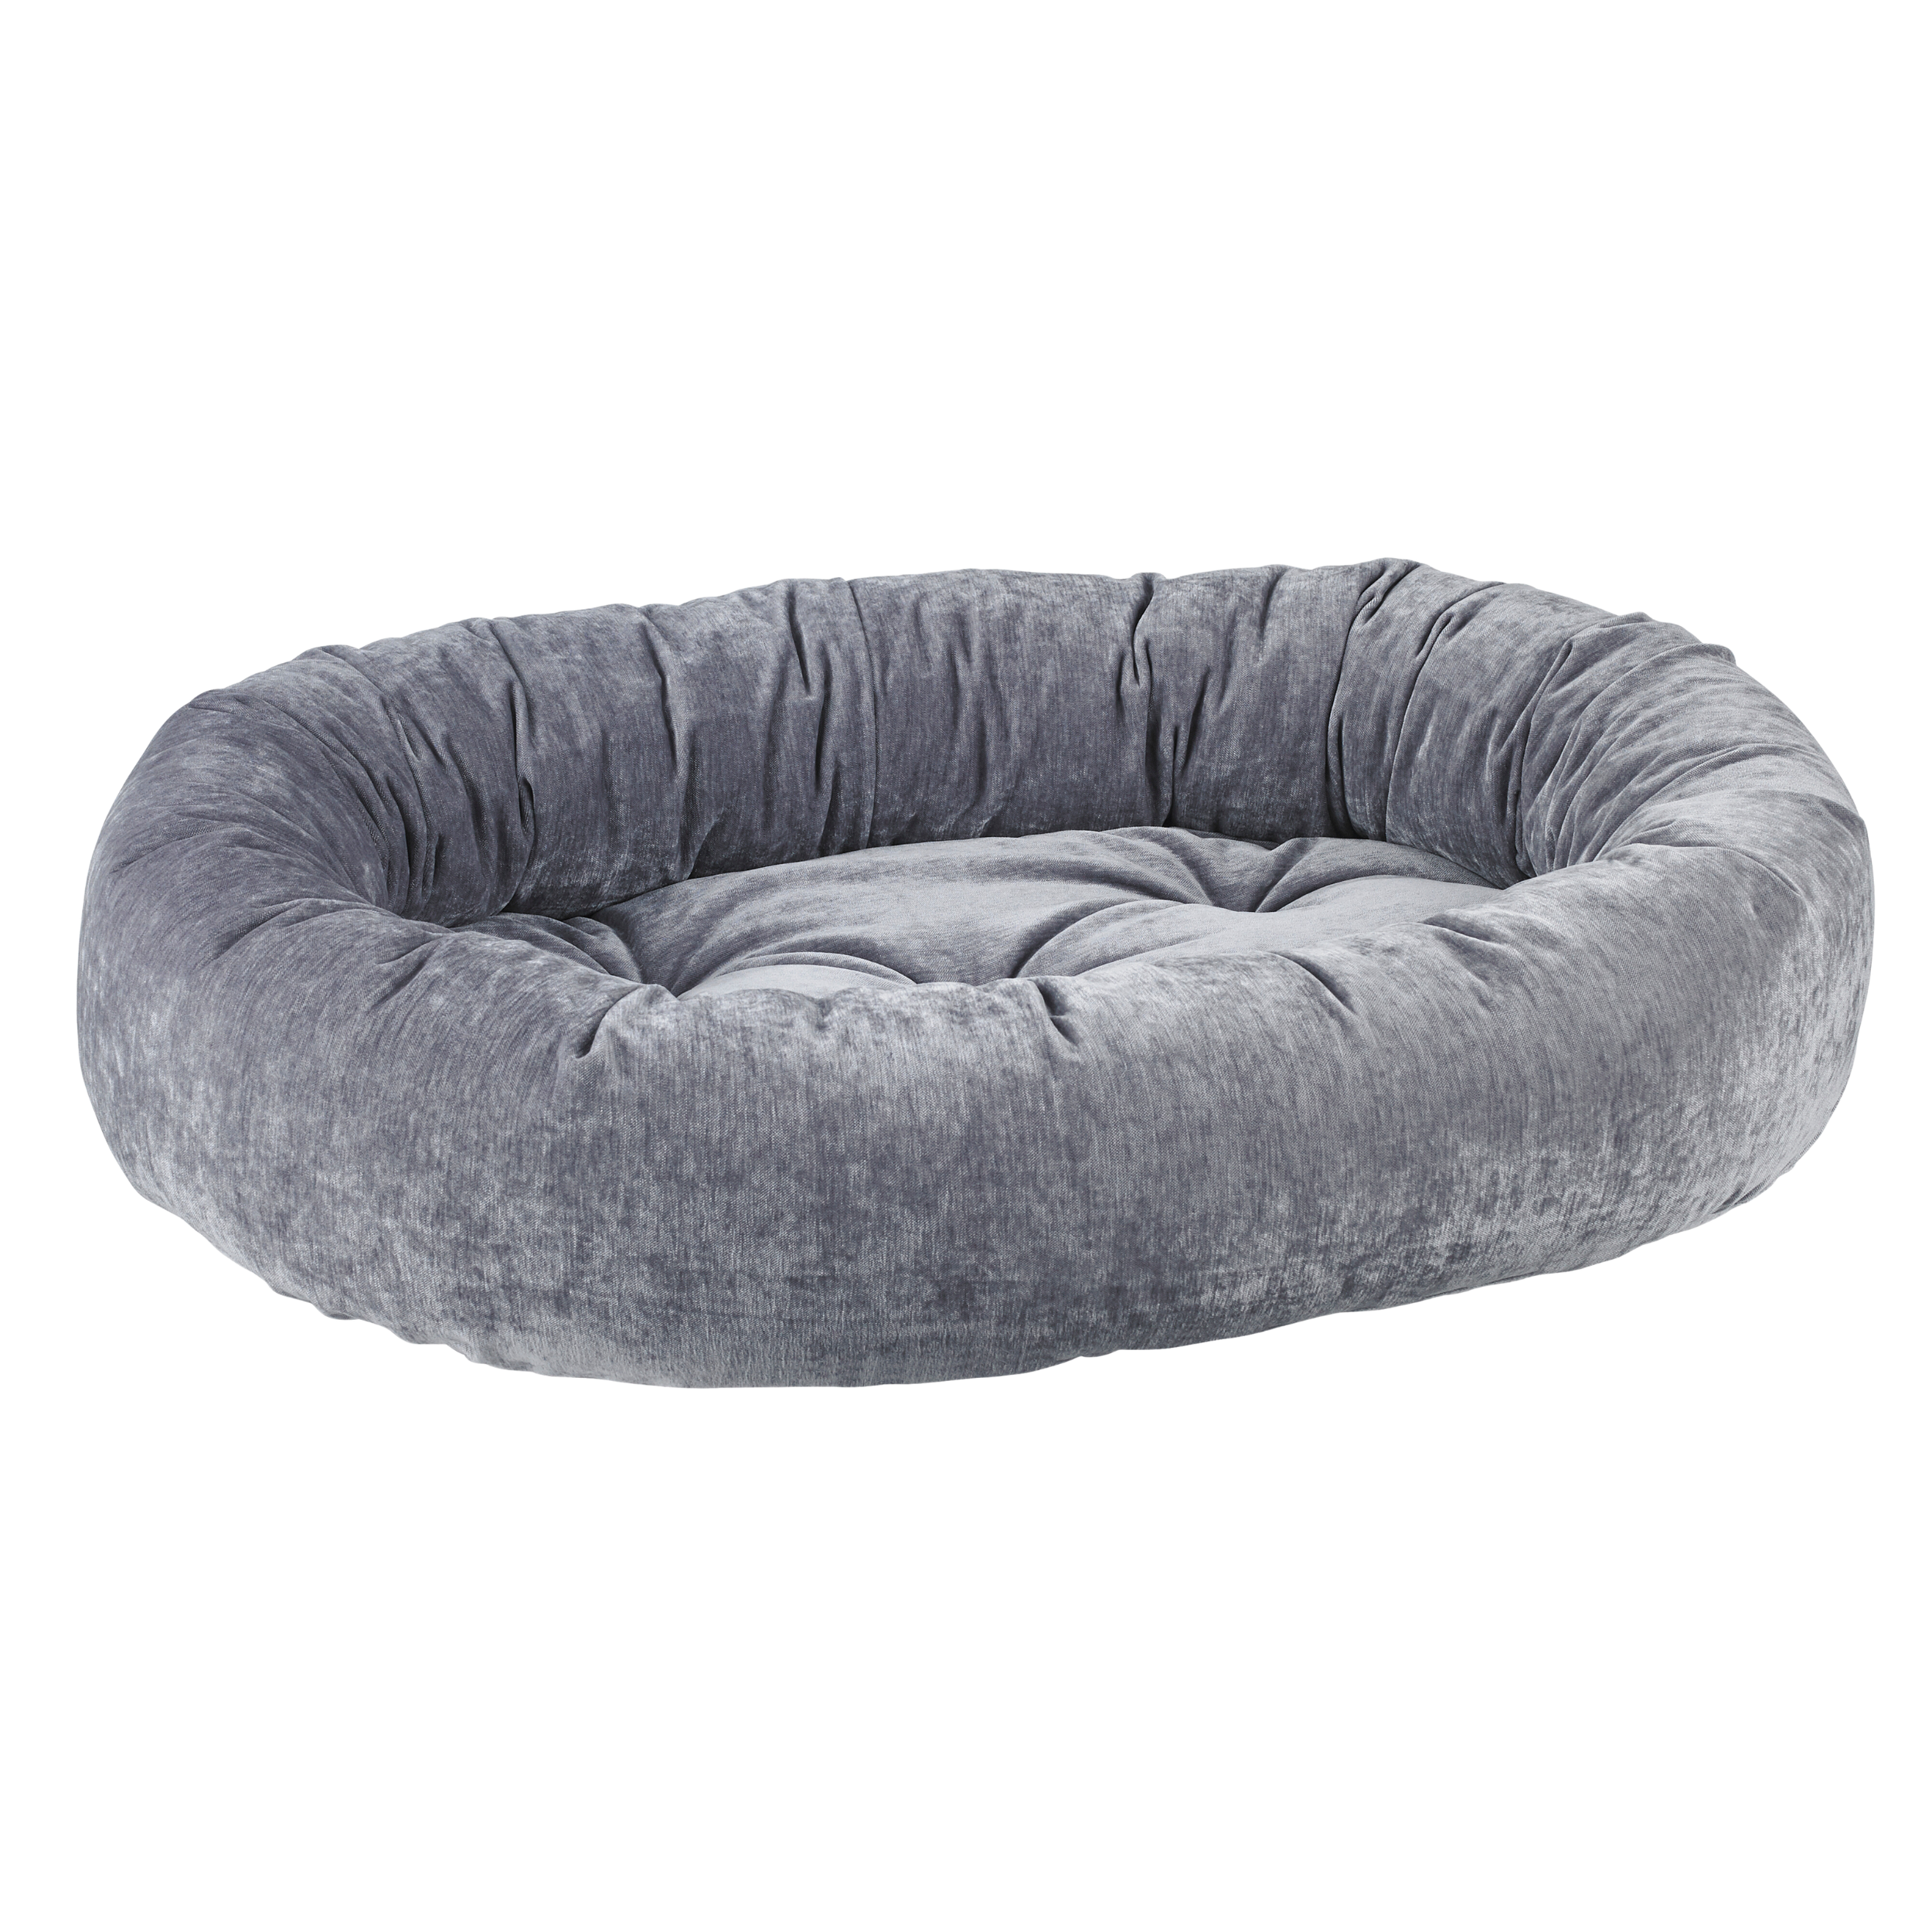 PUMICE-DONUT-DOG-BED